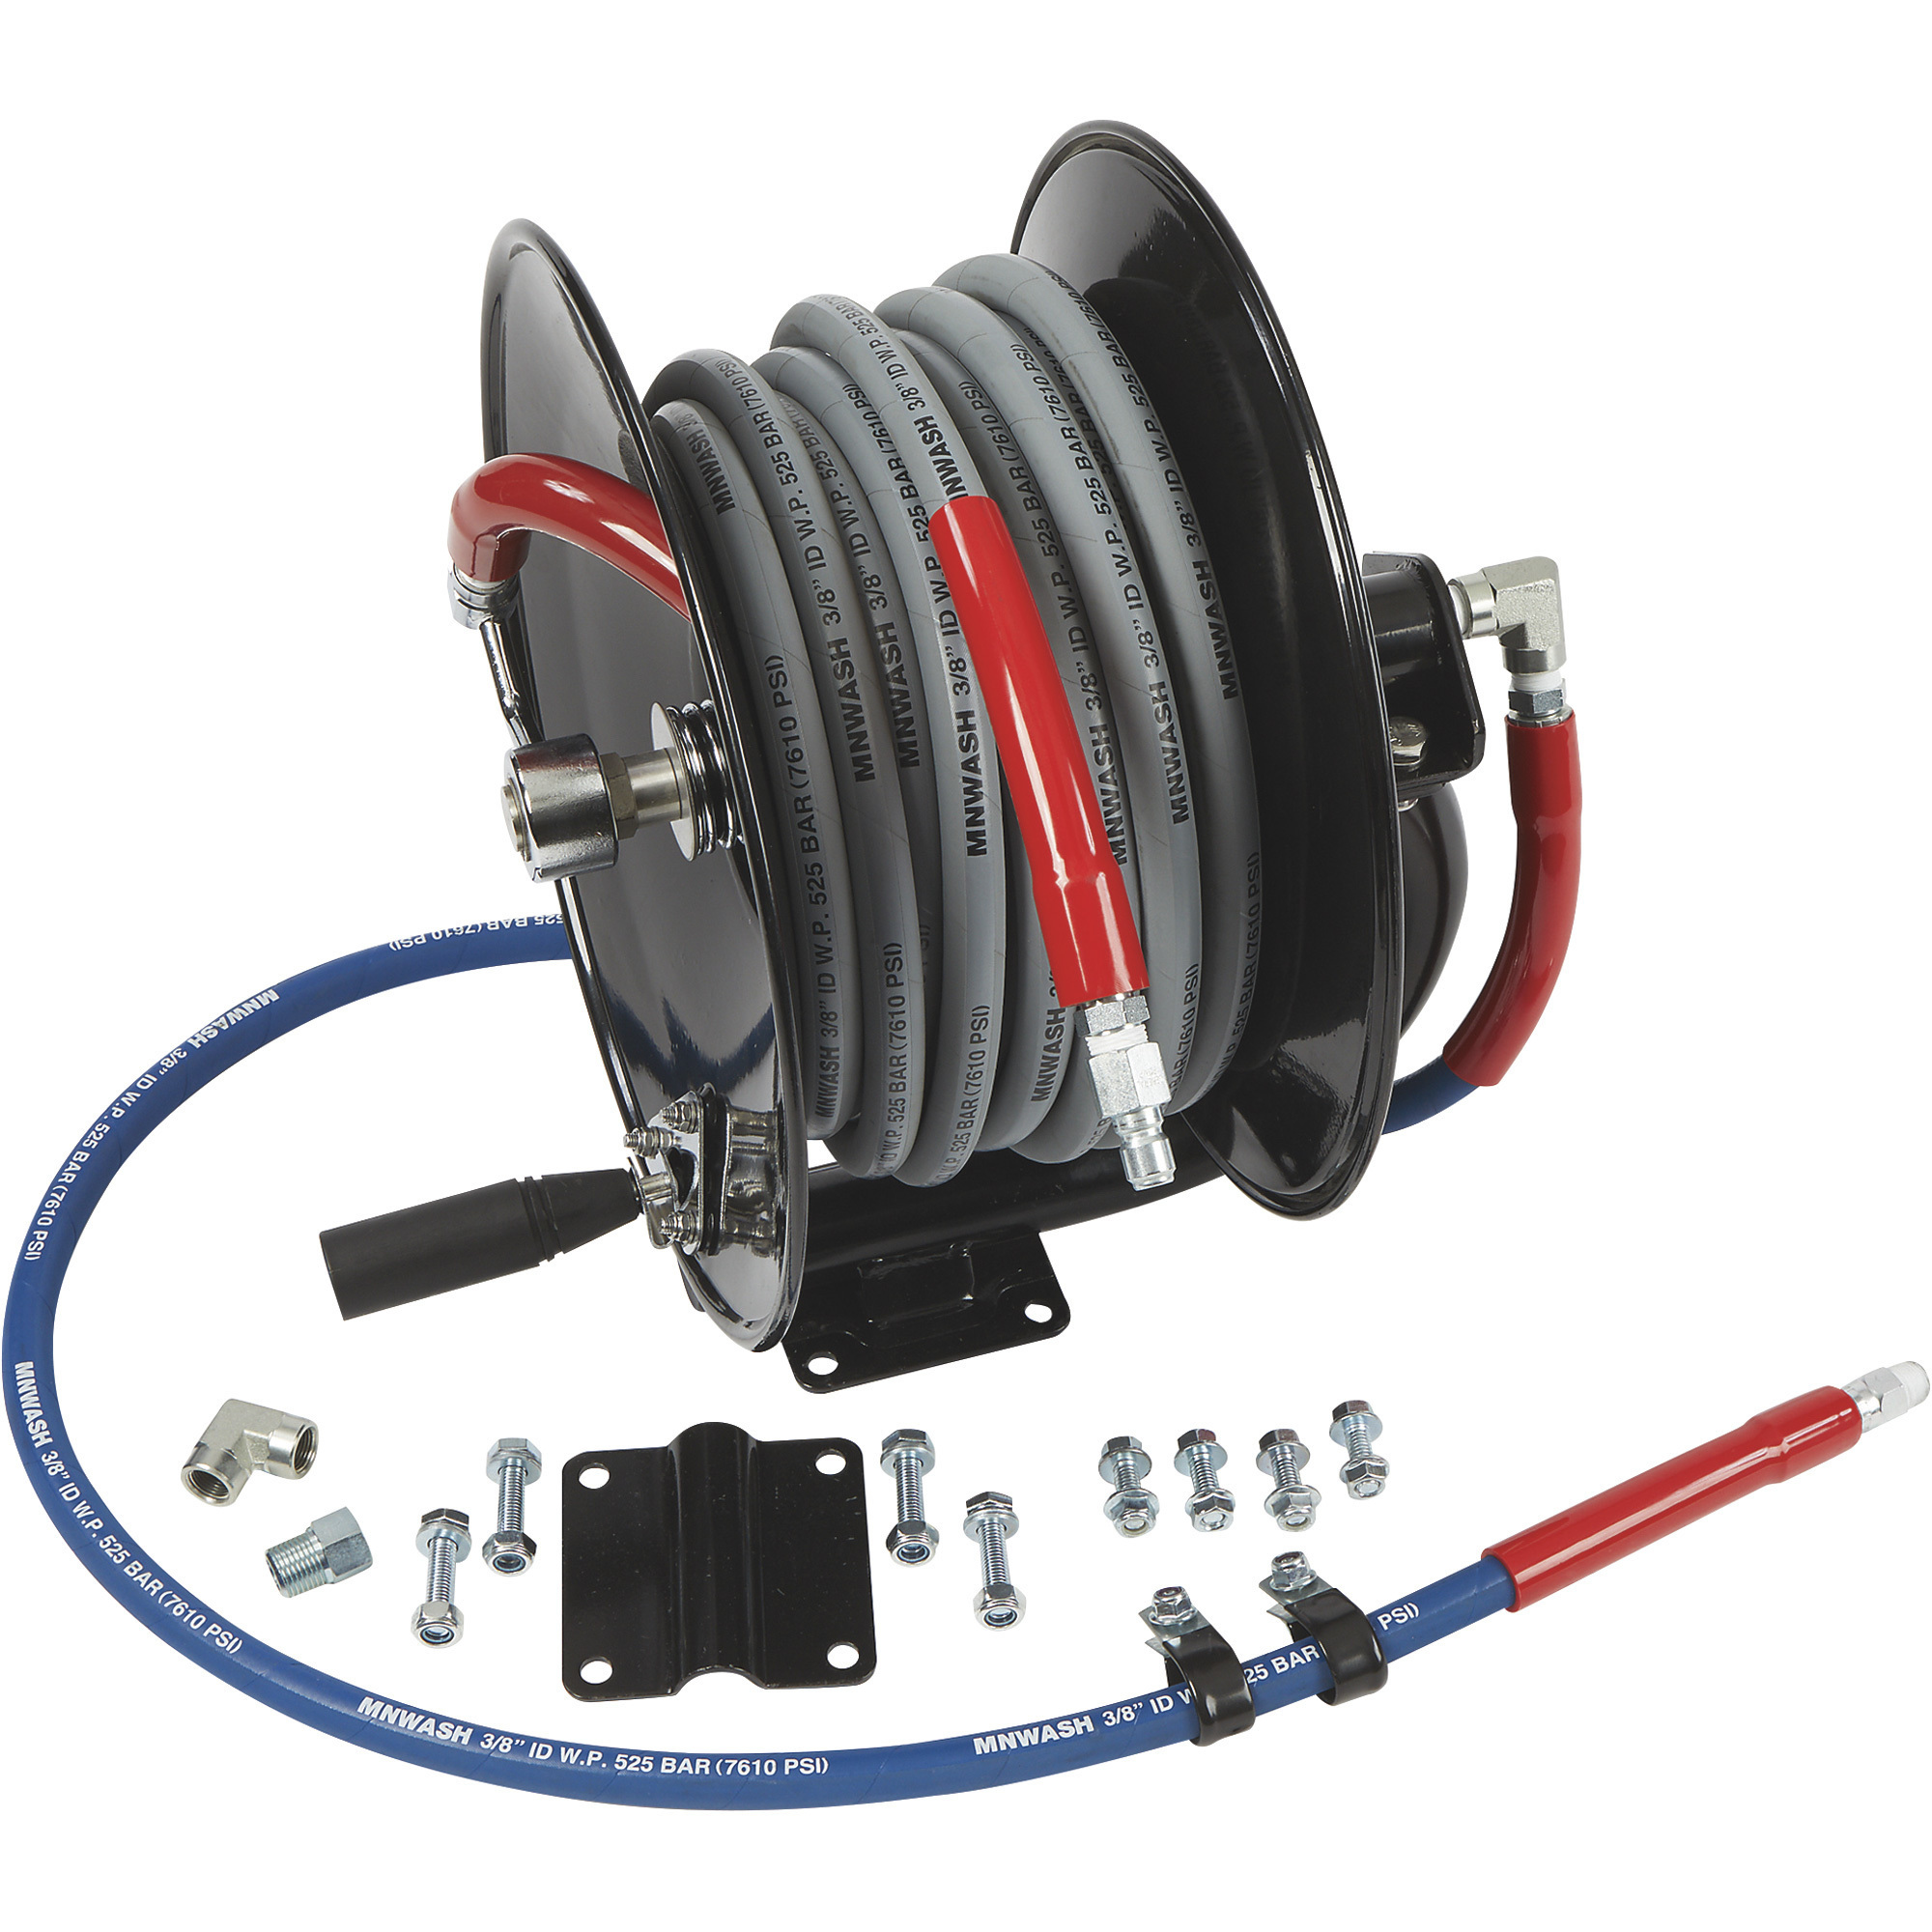 SB10H-NS HOSETRACT HOSE REEL, SBM SERIES MINI WITH SWIVEL & BASE, COMPACT  MANUAL DRIVEN MINI-REEL, FOR 175 FT. OF 1/4, 150 FT. OF 3/8 HOSE OR 100 FT.  OF 1/2 HOSE, MAXIMUM